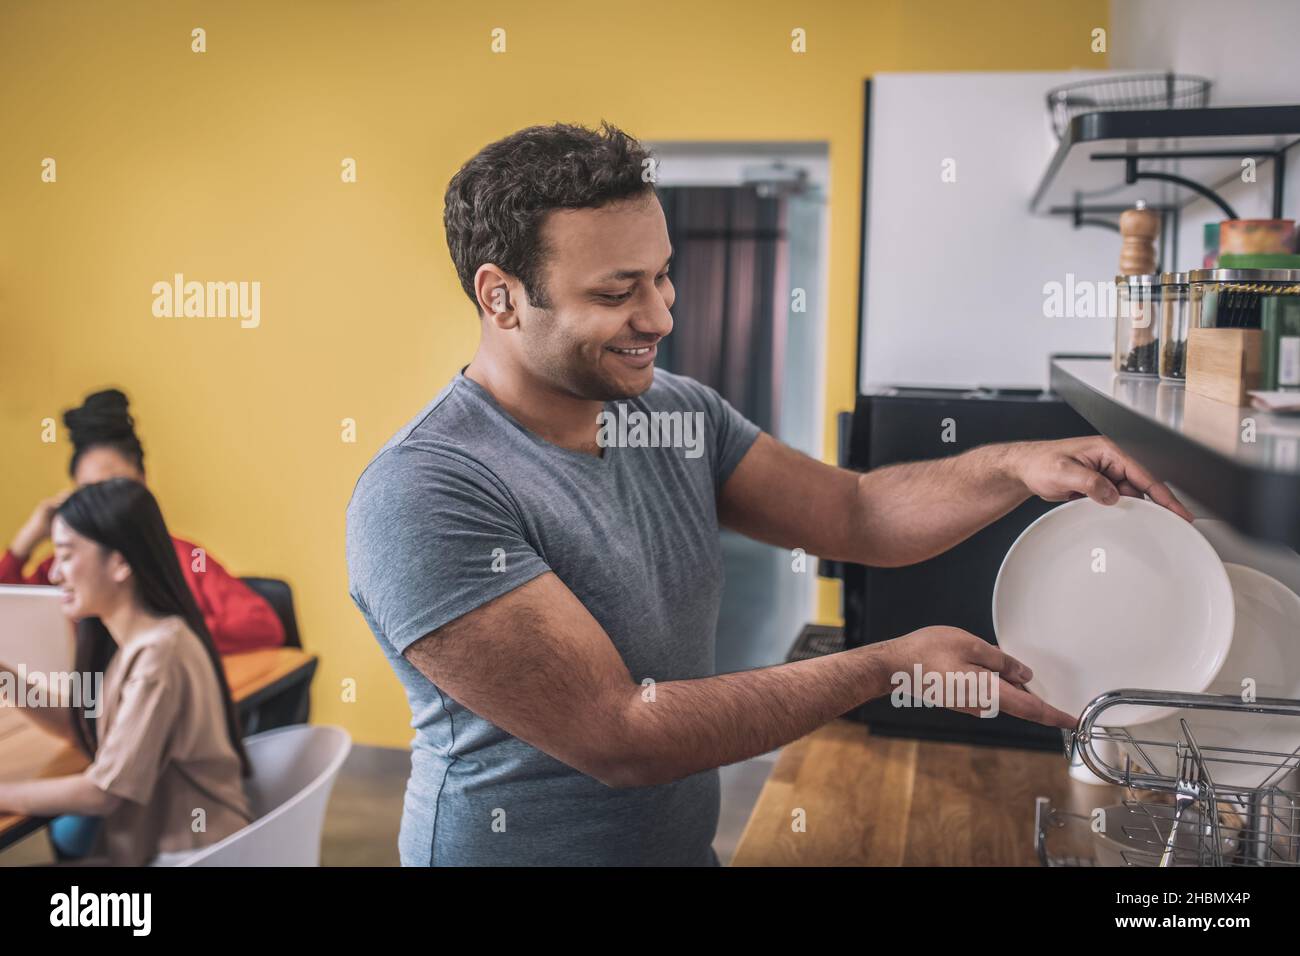 Guy stacking clean plates in office kitchen Stock Photo